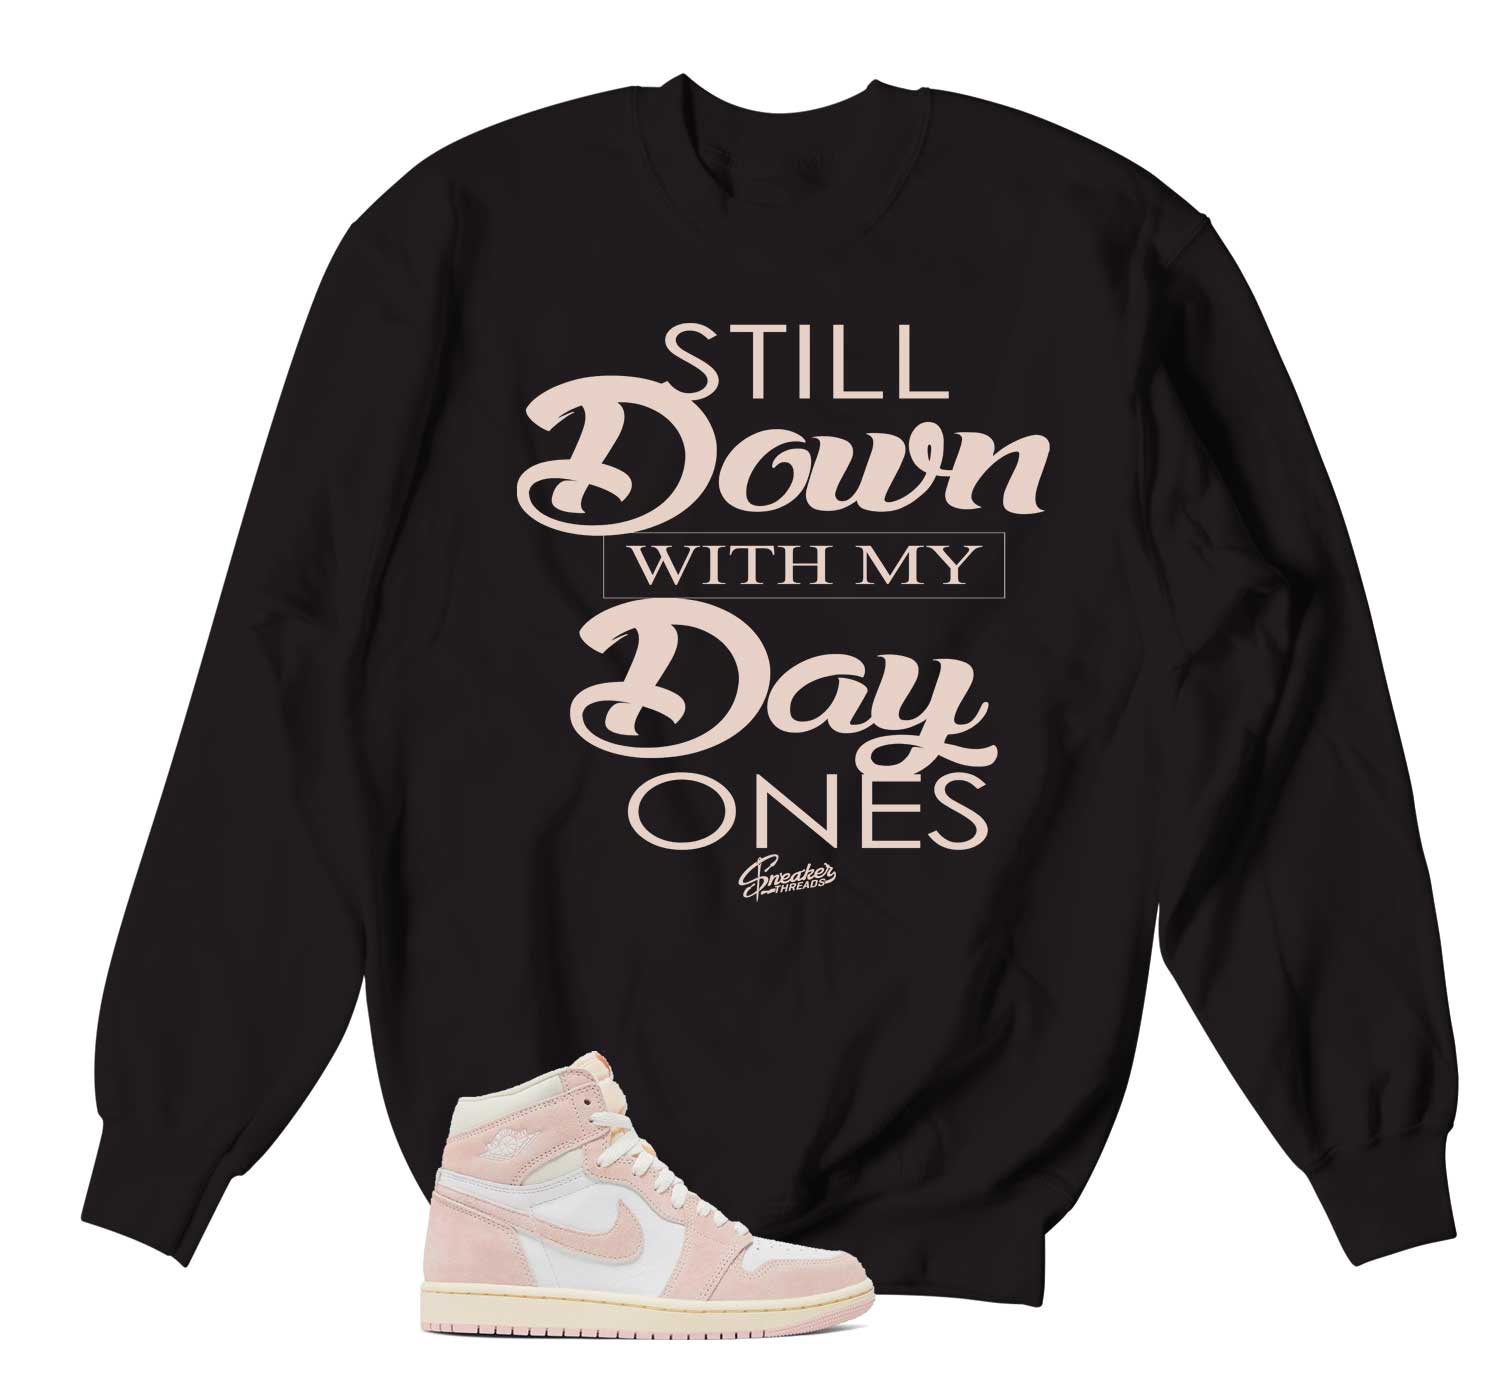 Retro 1 Washed Pink Sweater - Day Ones - Black